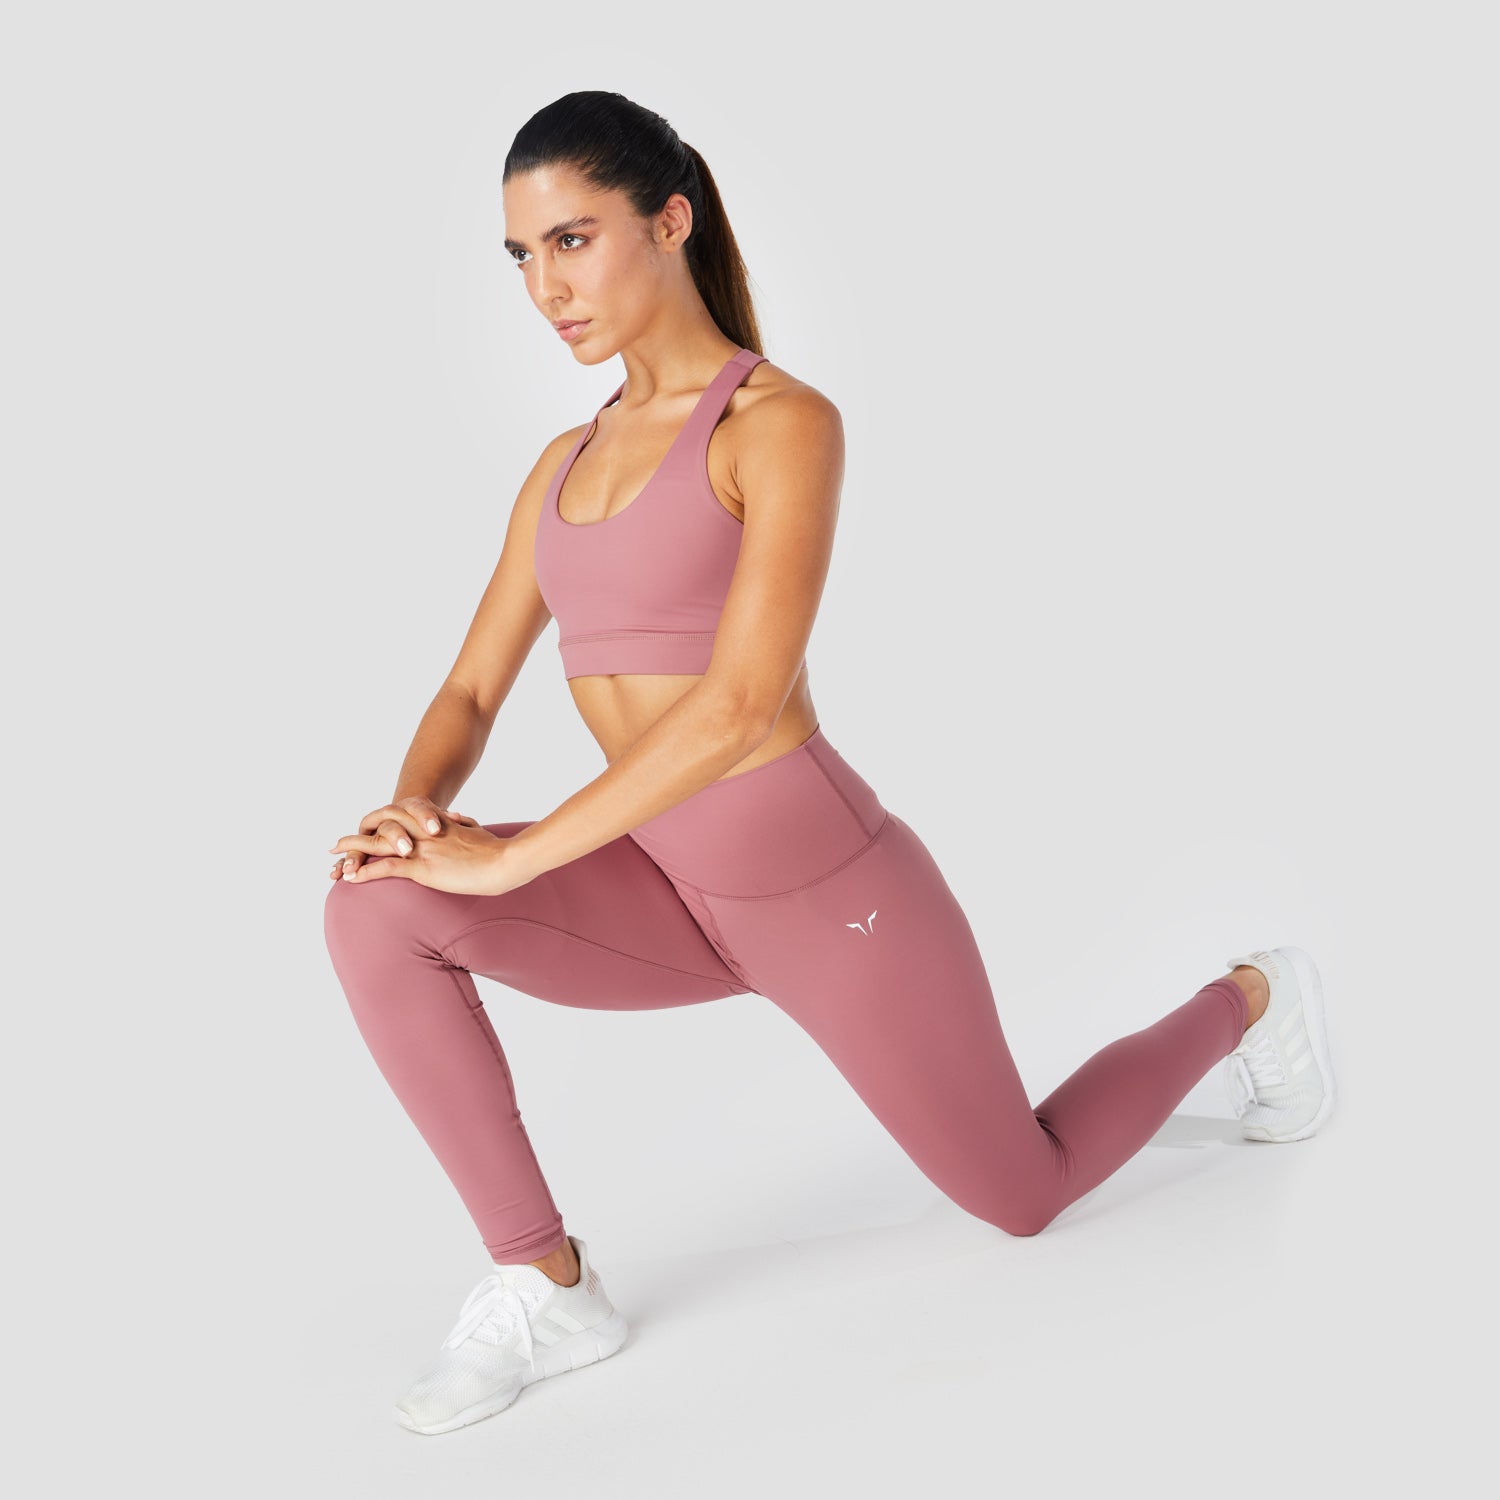 squatwolf-workout-clothes-core-agile-bra-pink-sports-bra-for-gym